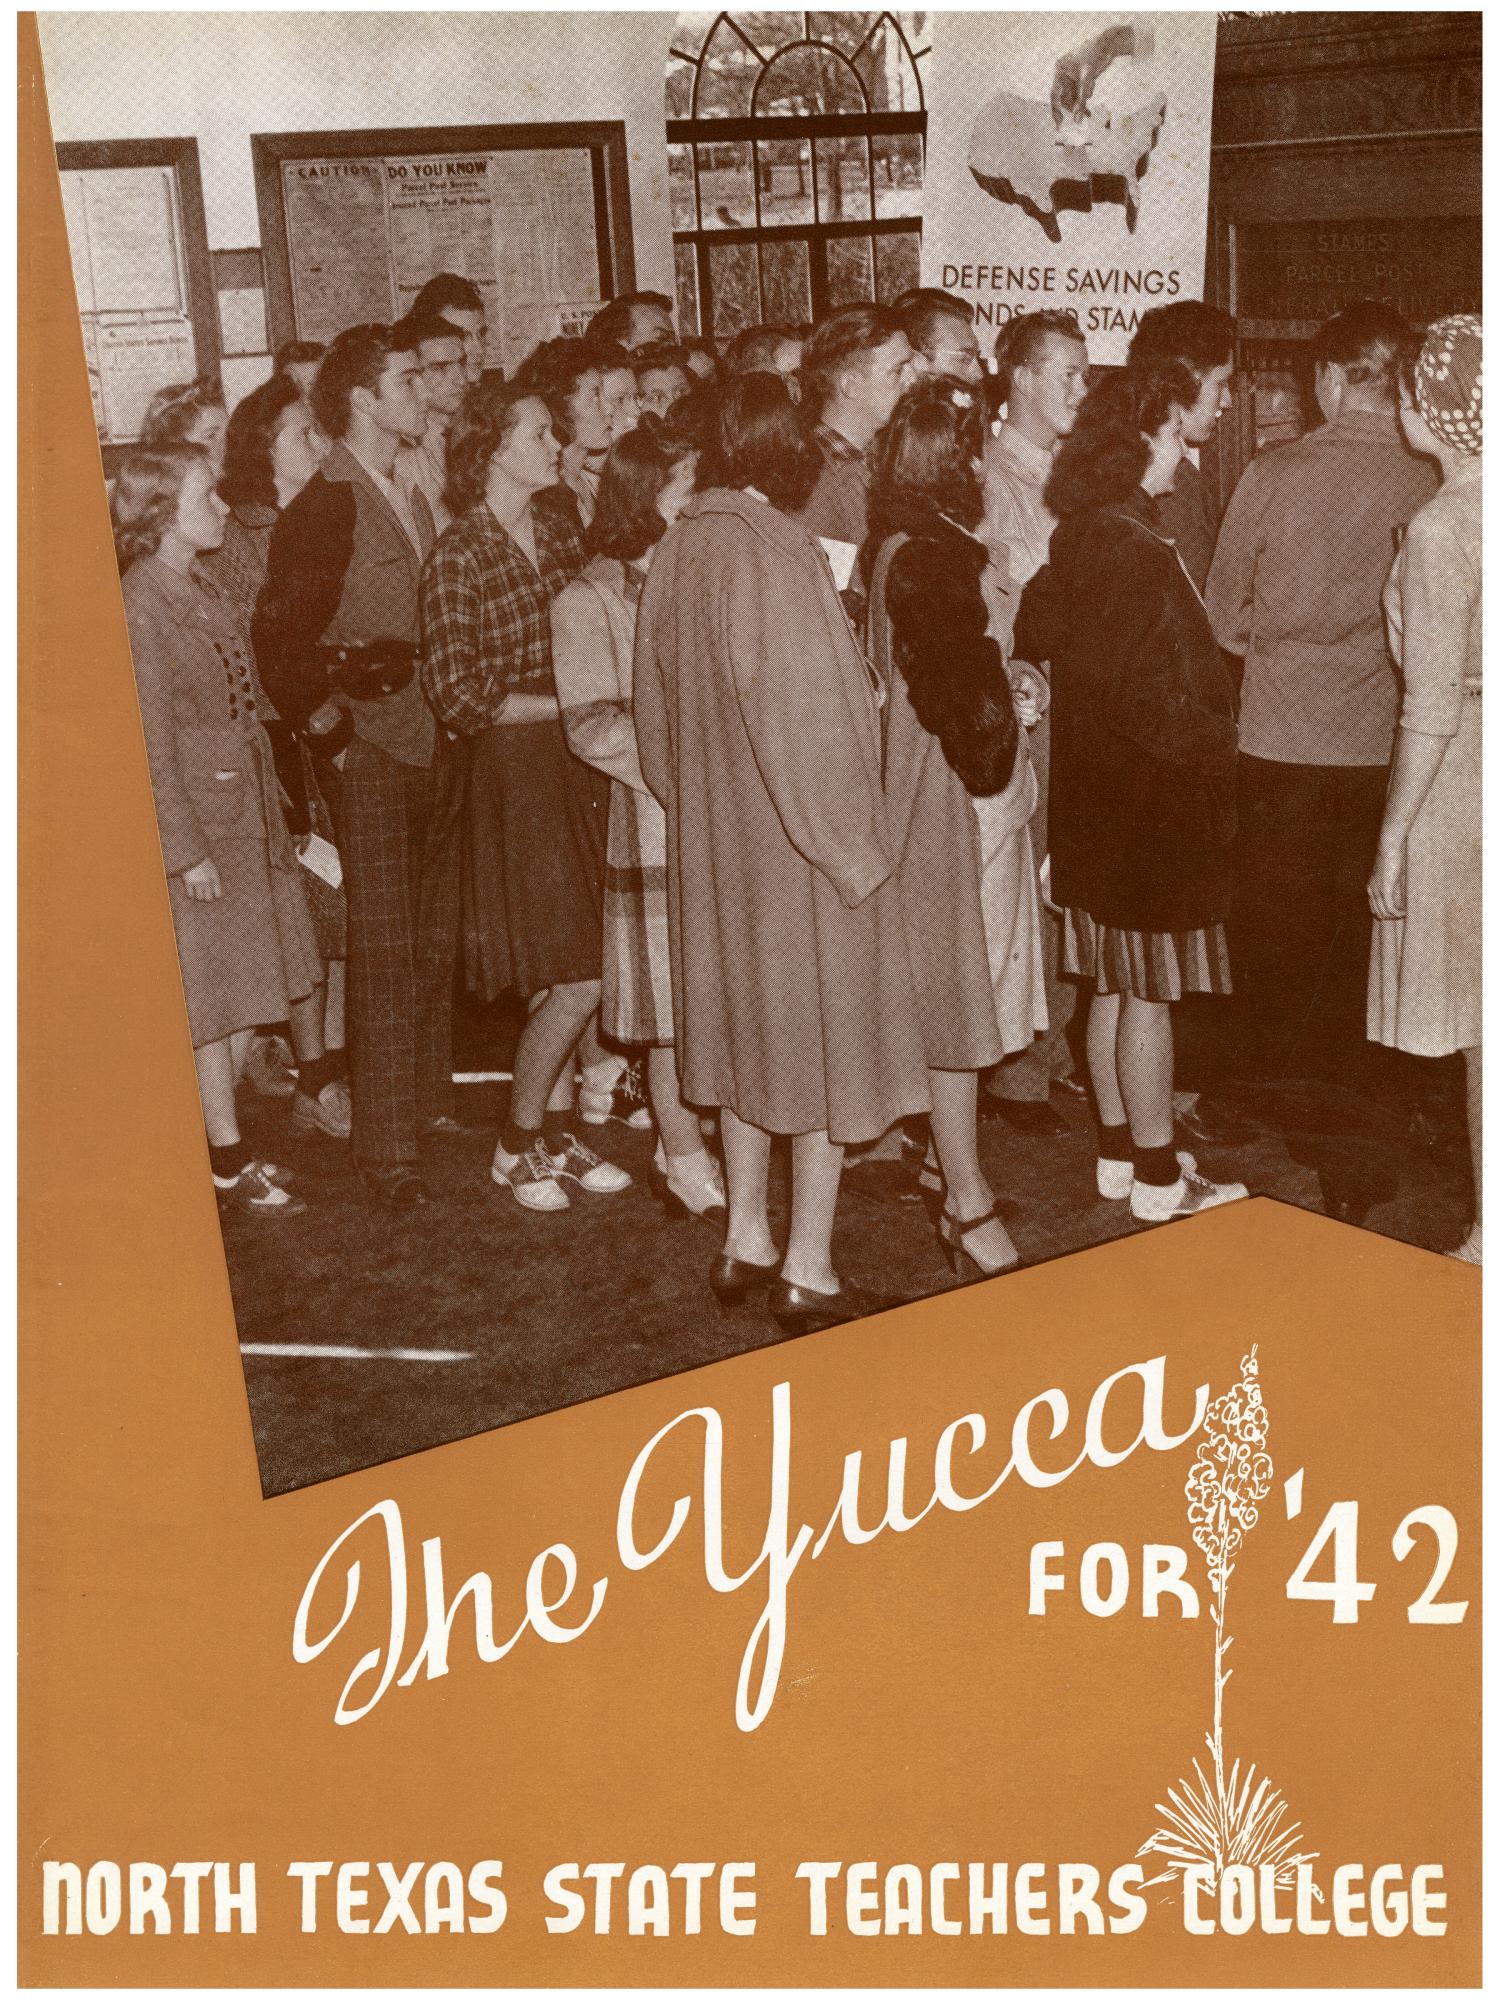 The Yucca, Yearbook of North Texas State Teacher's College, 1942
                                                
                                                    1
                                                